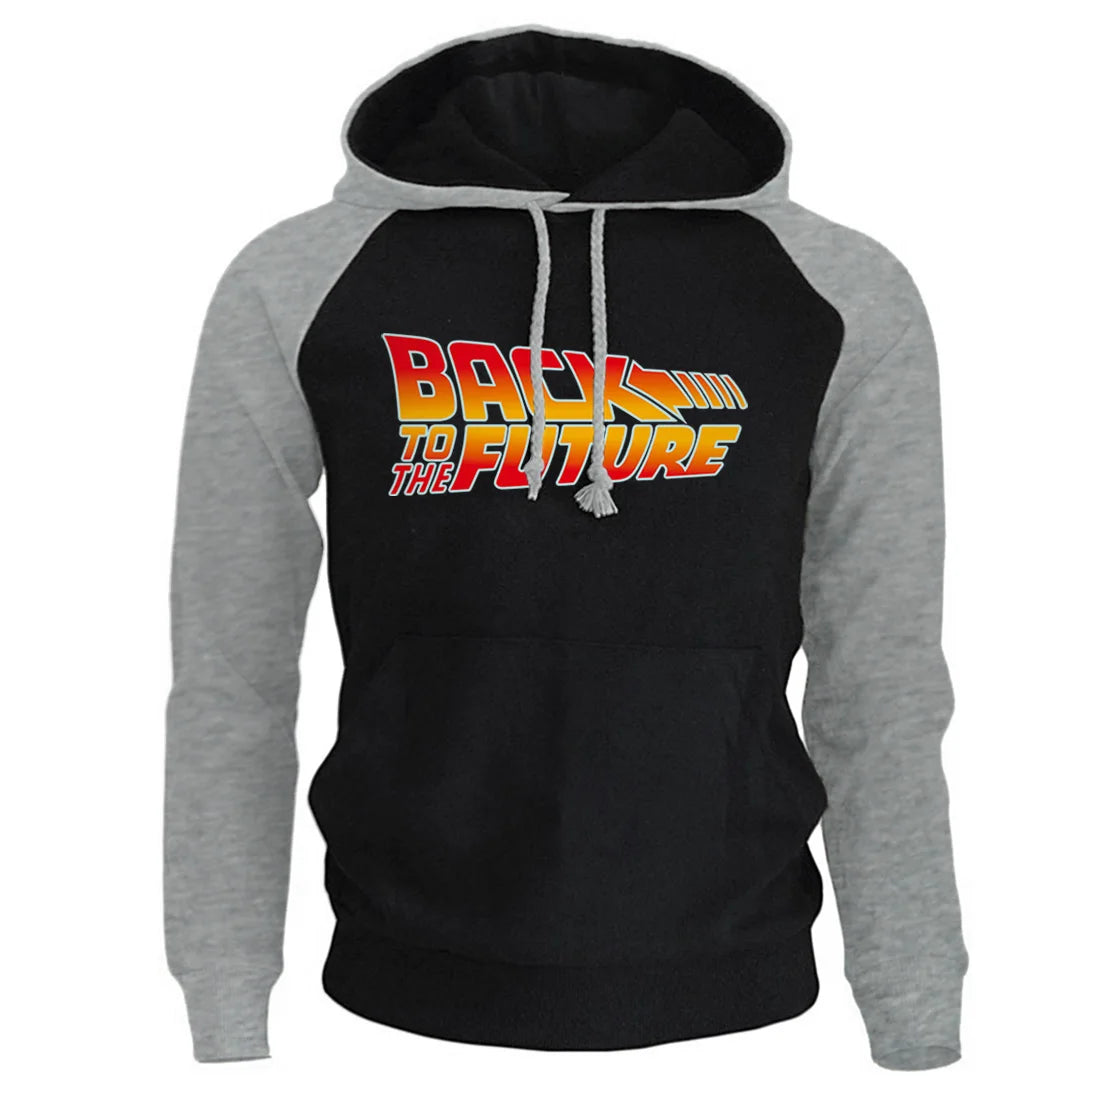 Back to the Future Hoodie